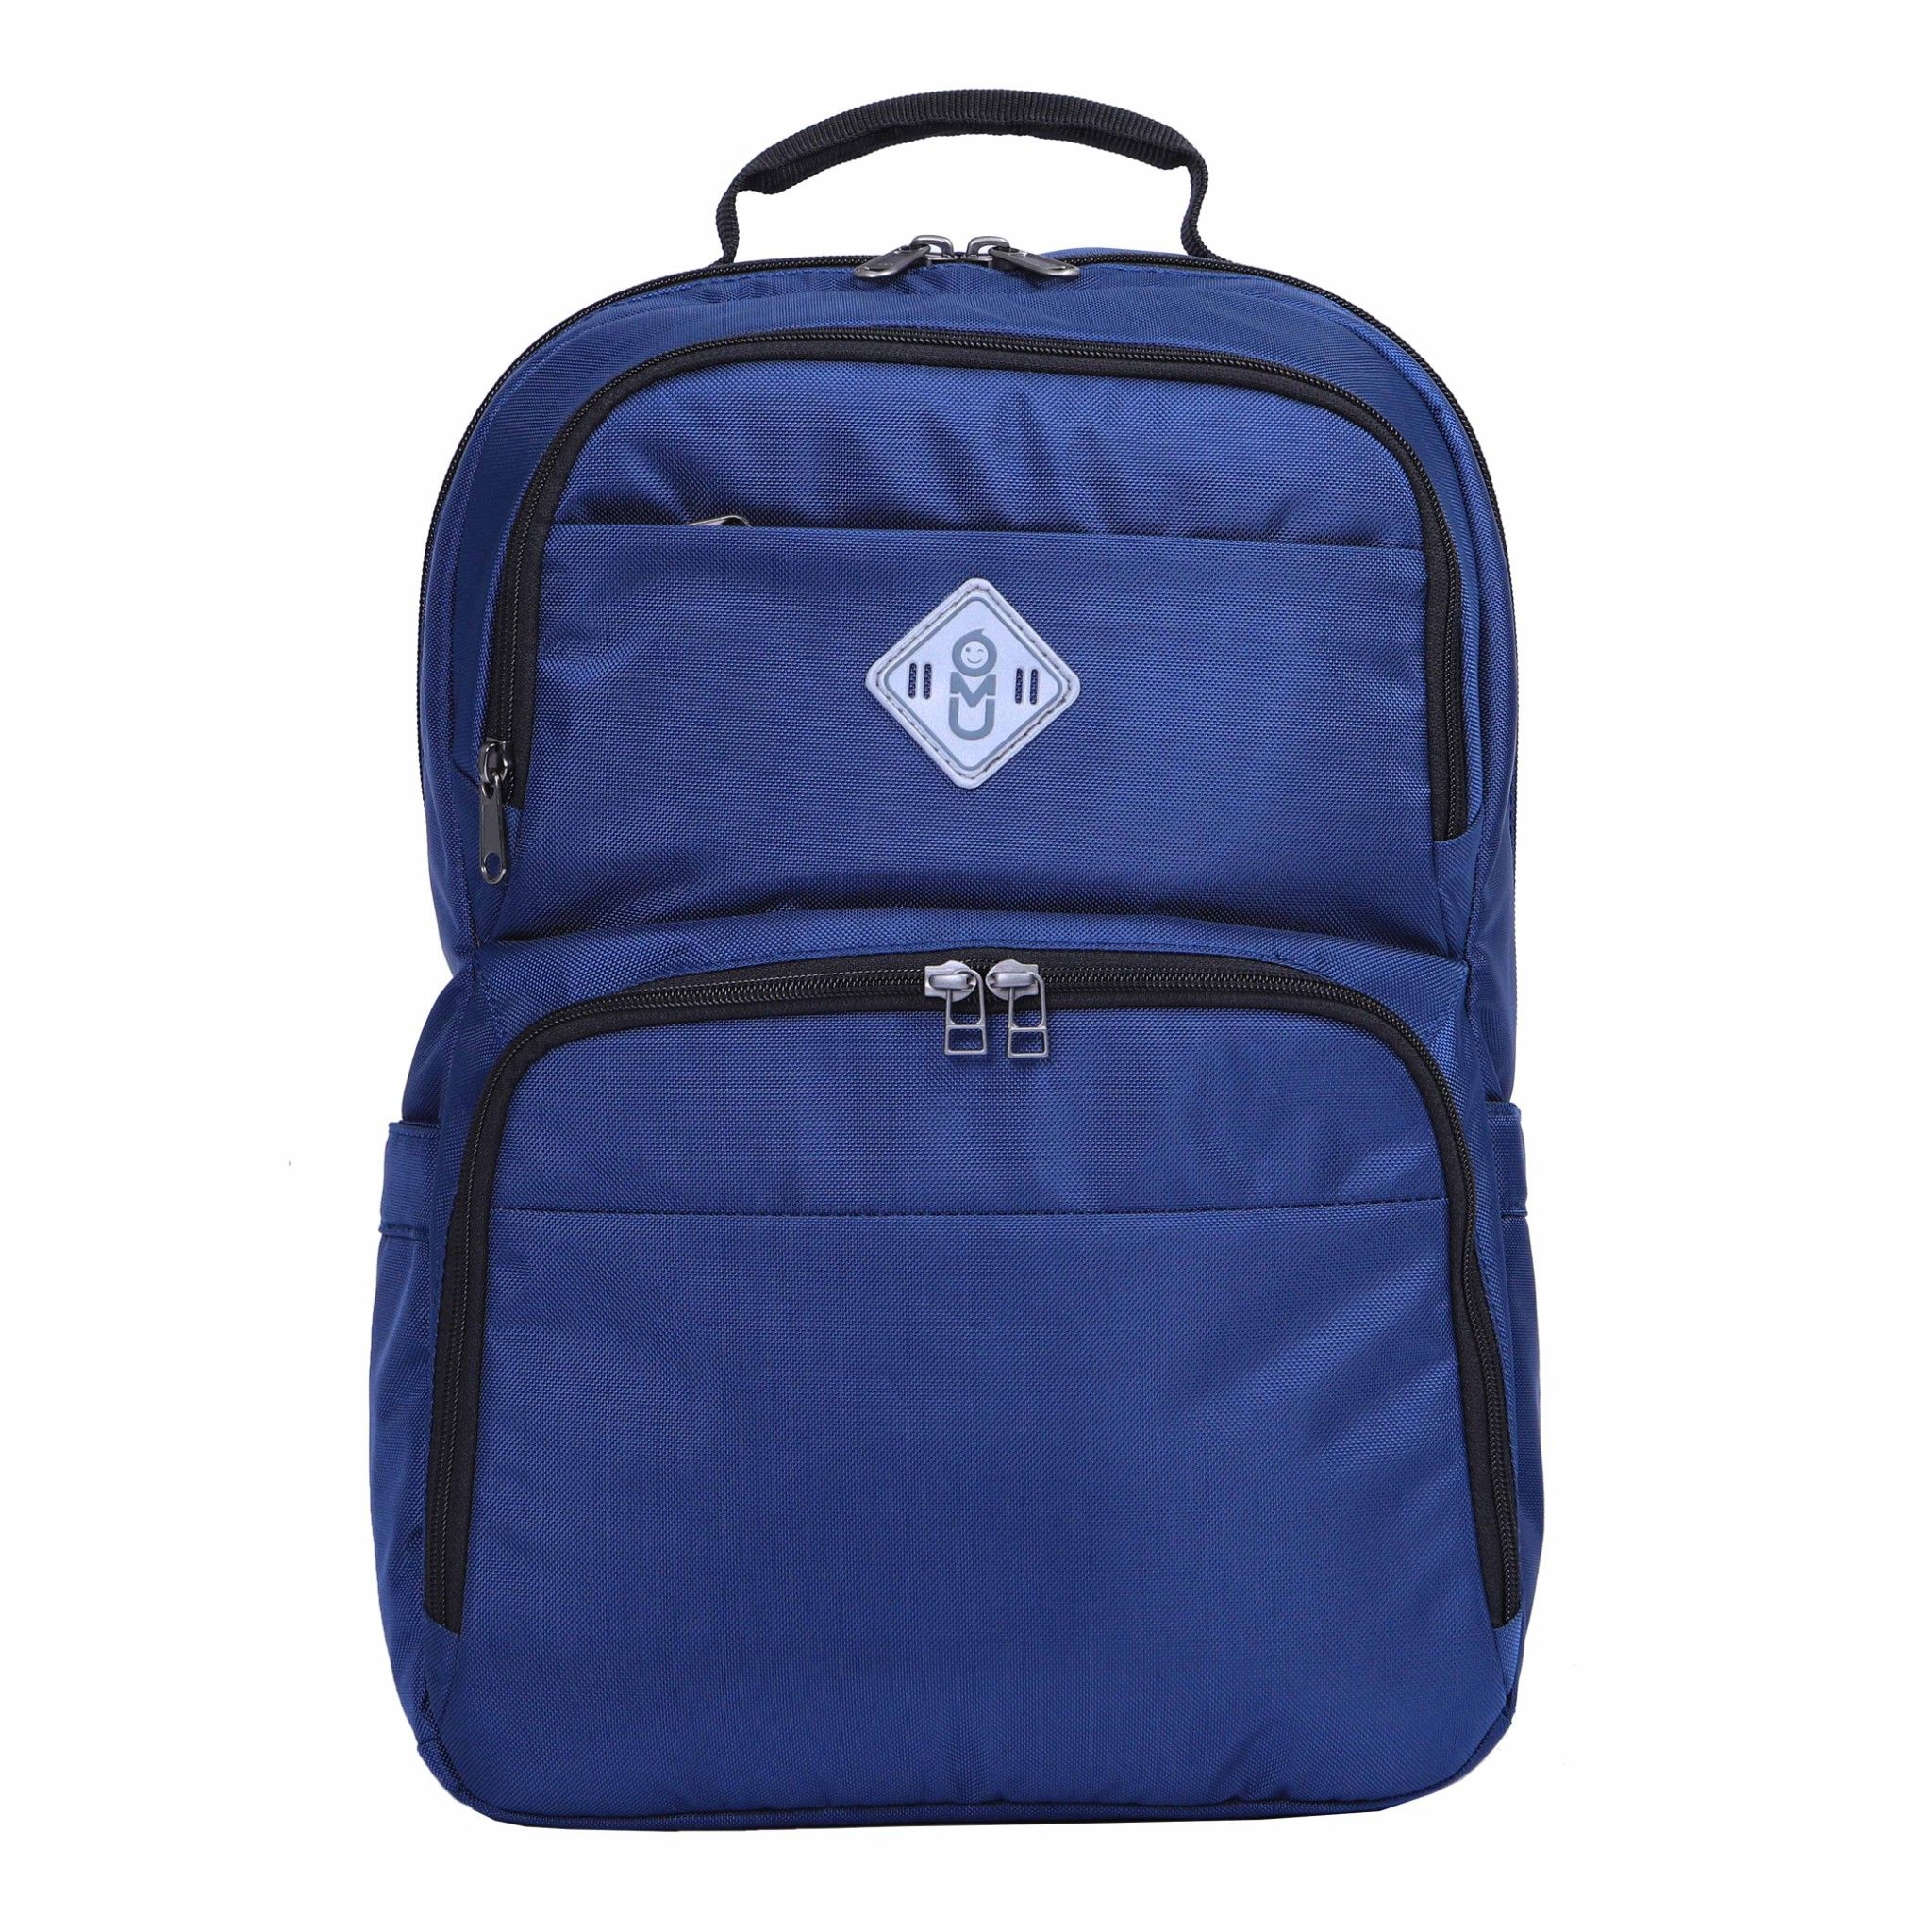  UMO DYNAMIC BackPack Navy- Balo Laptop Cao Cấp 